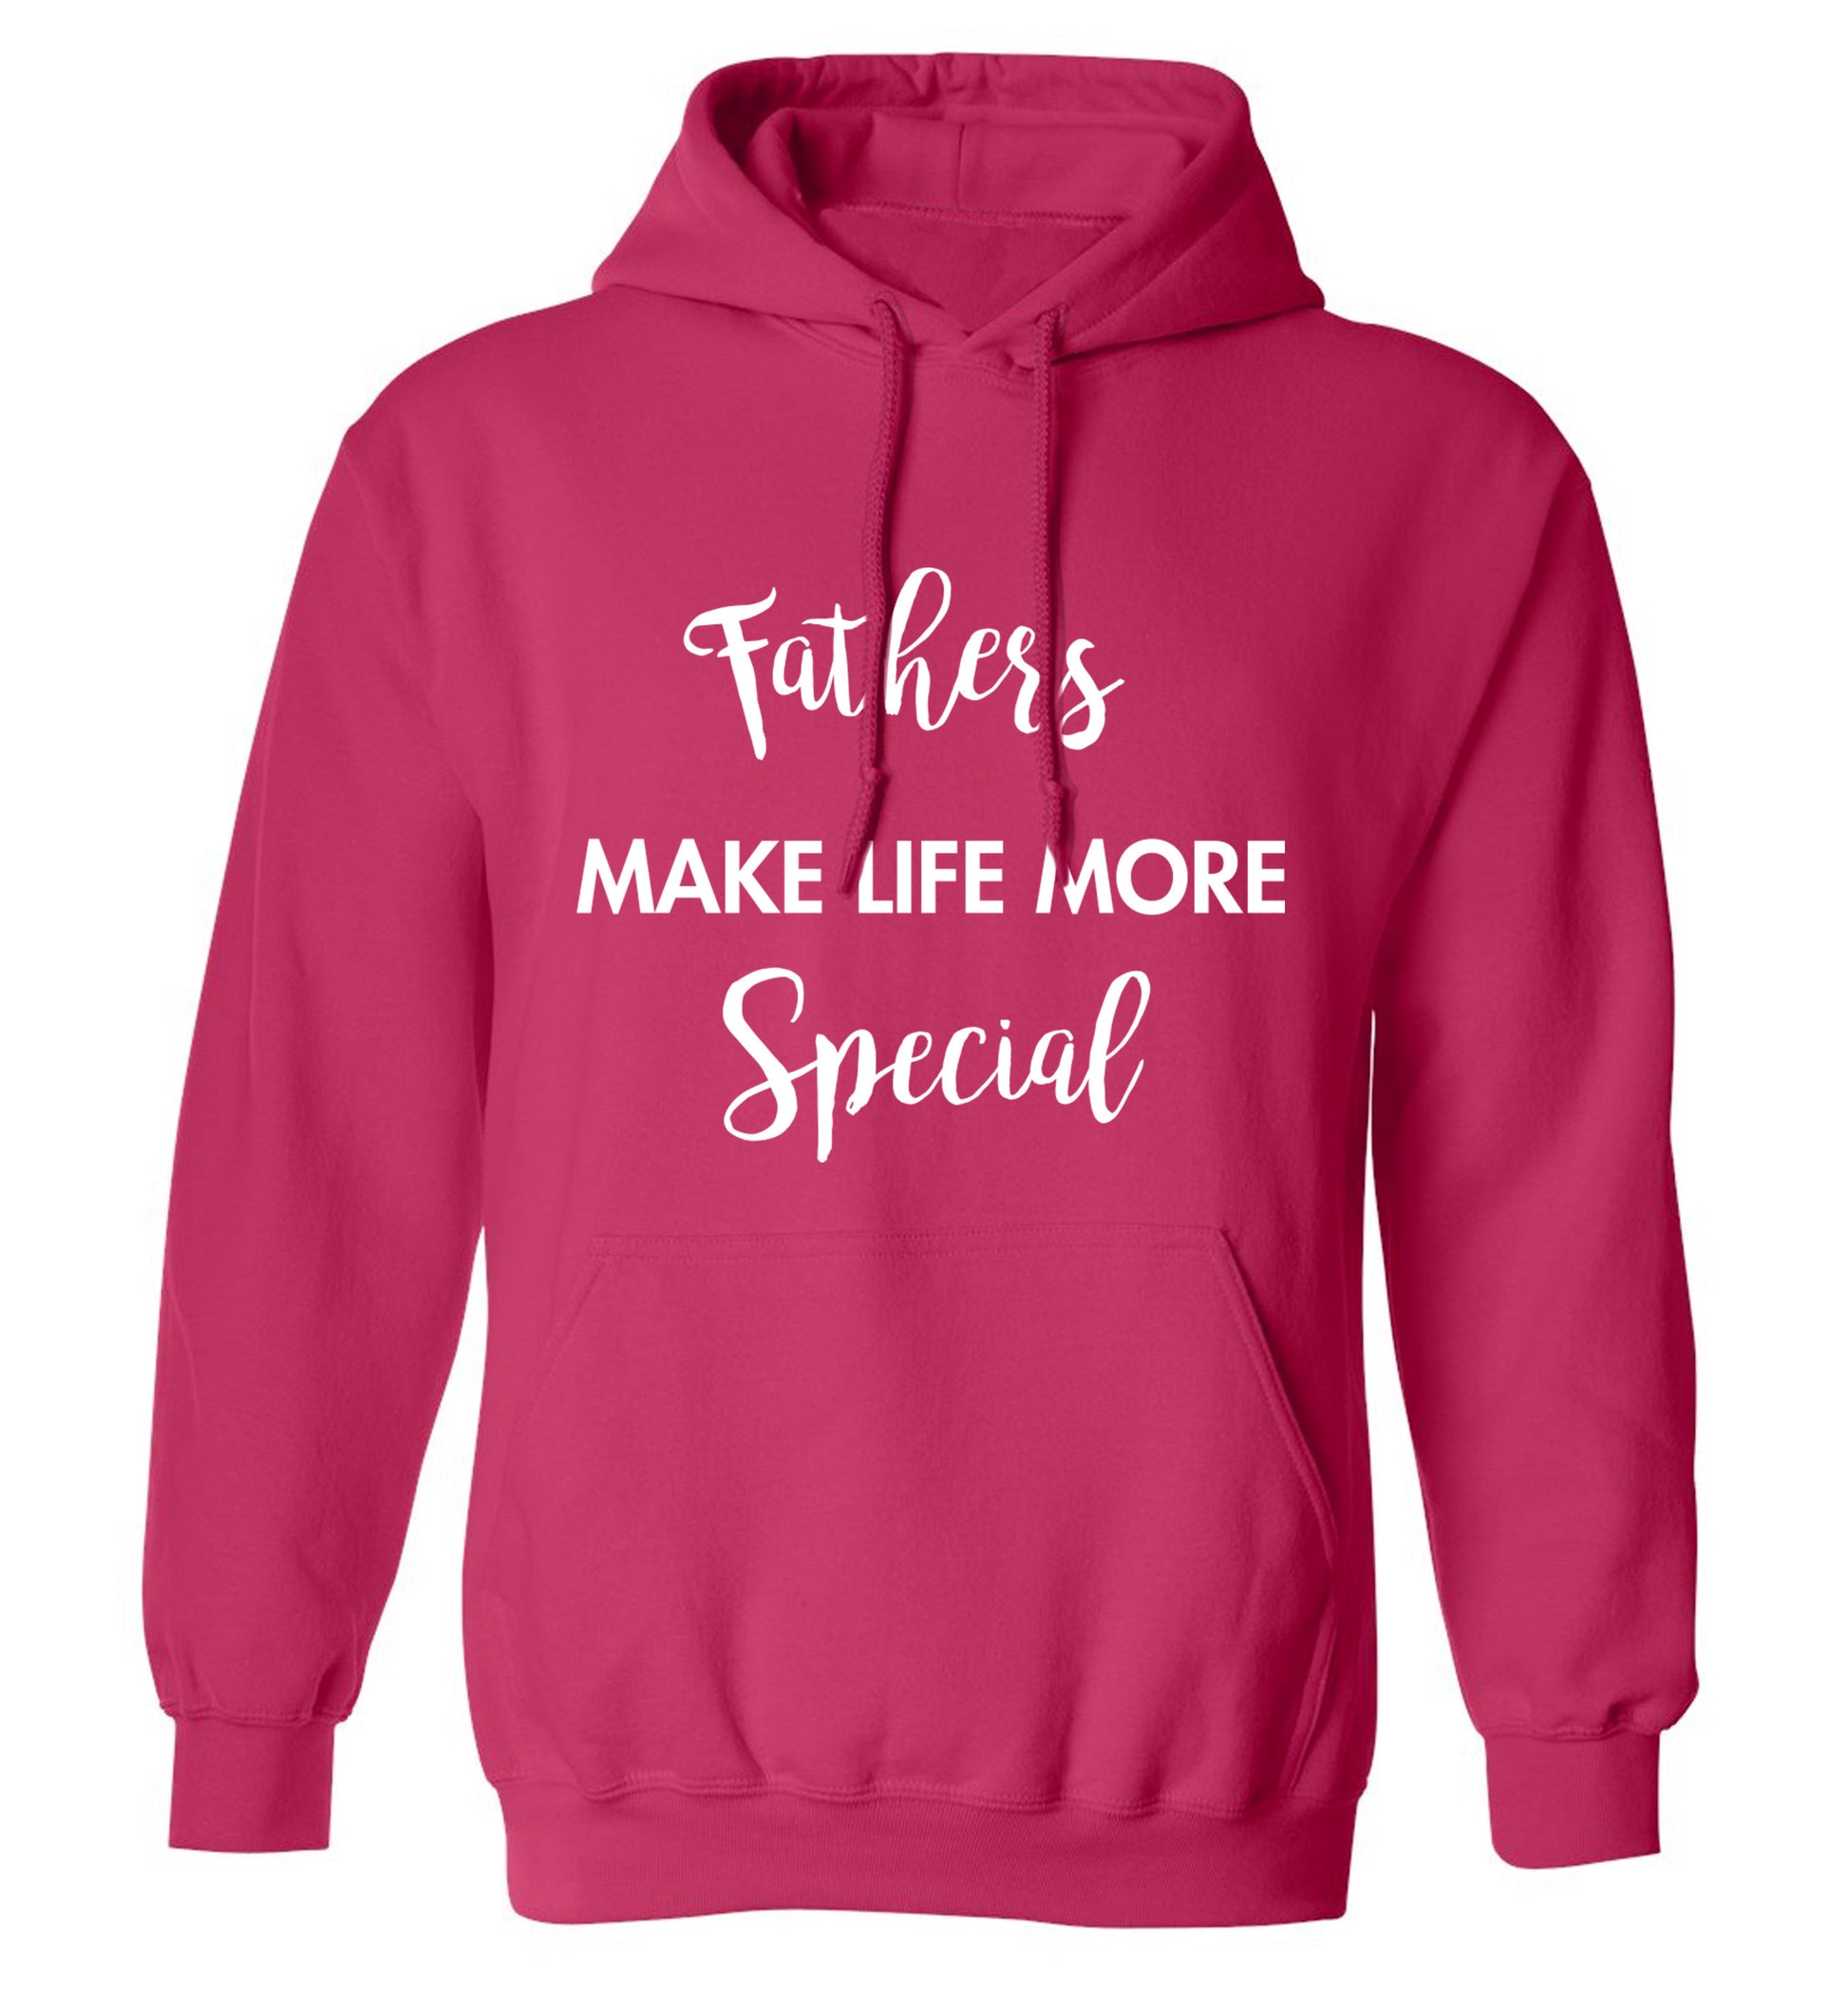 Fathers make life more special adults unisex pink hoodie 2XL